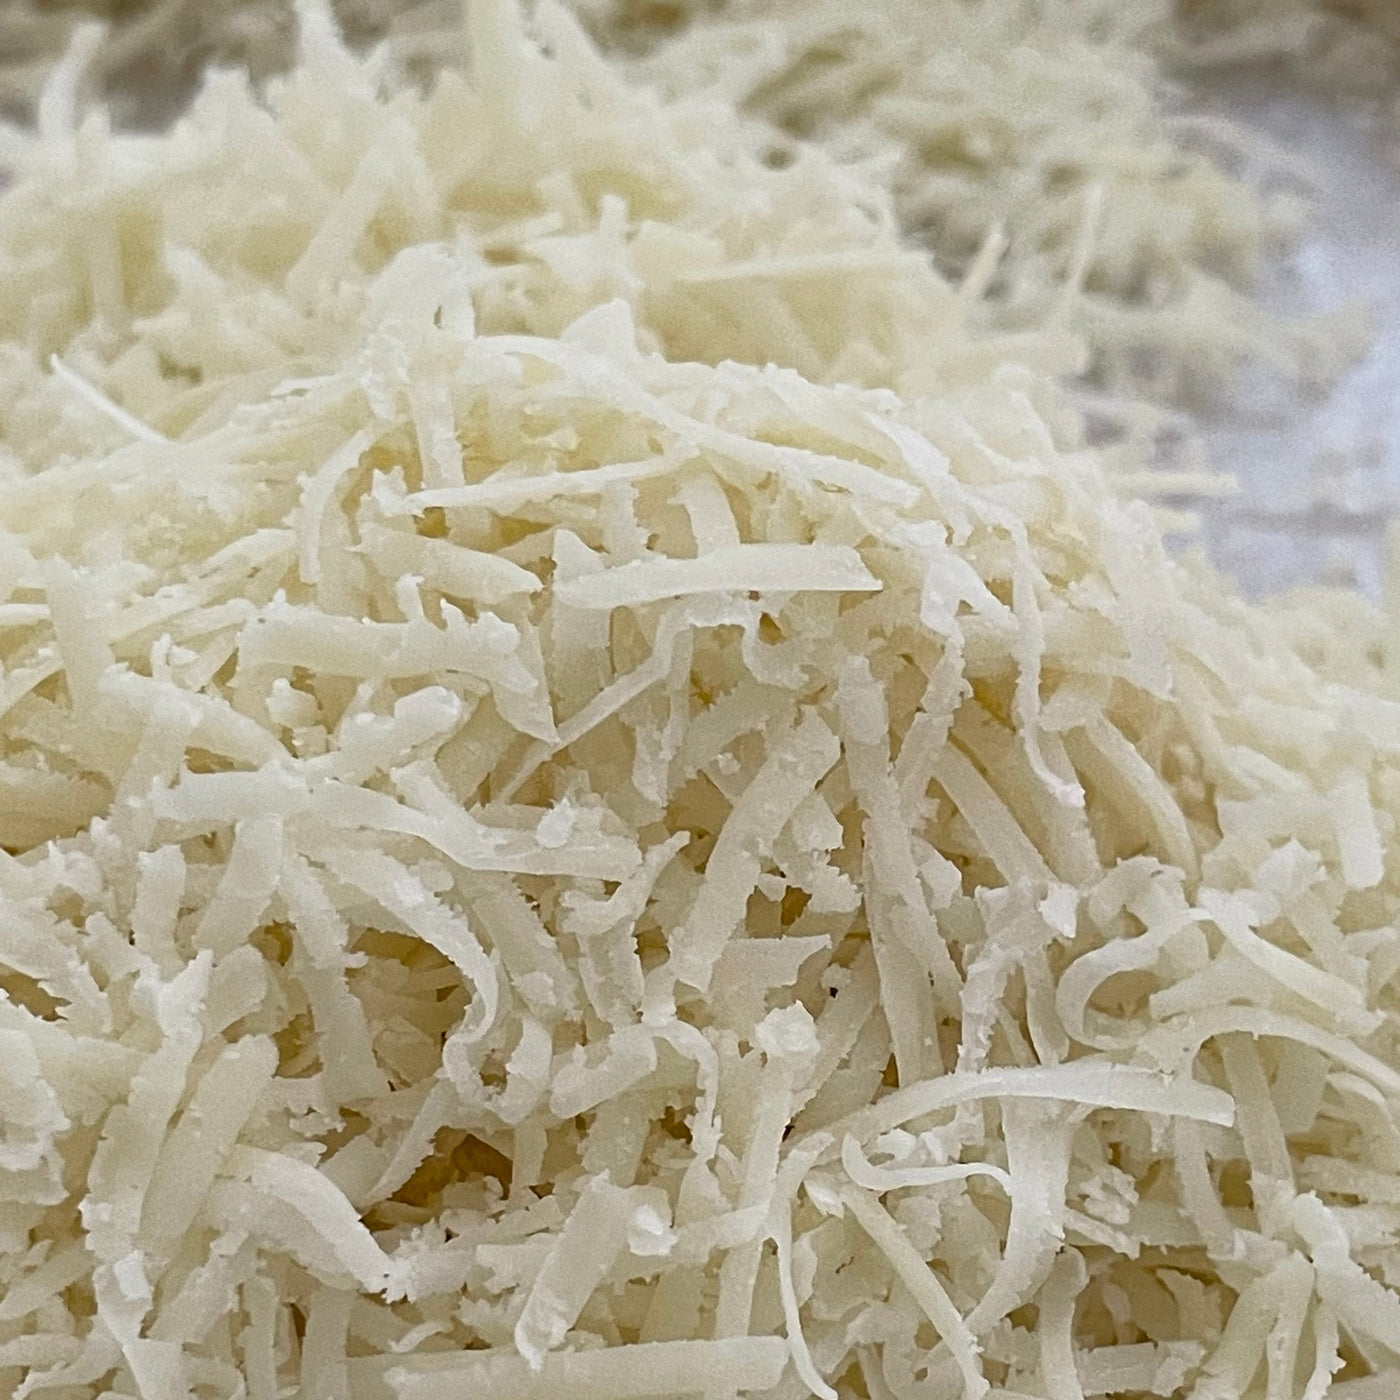 3 month Käse aged Pecorino, grated to order. The pecorino is made from Pastoral sheep’s milk. It’s sharp, salty and intense. Natural artisan cheese made locally with no preservatives or additives. Ships across India.